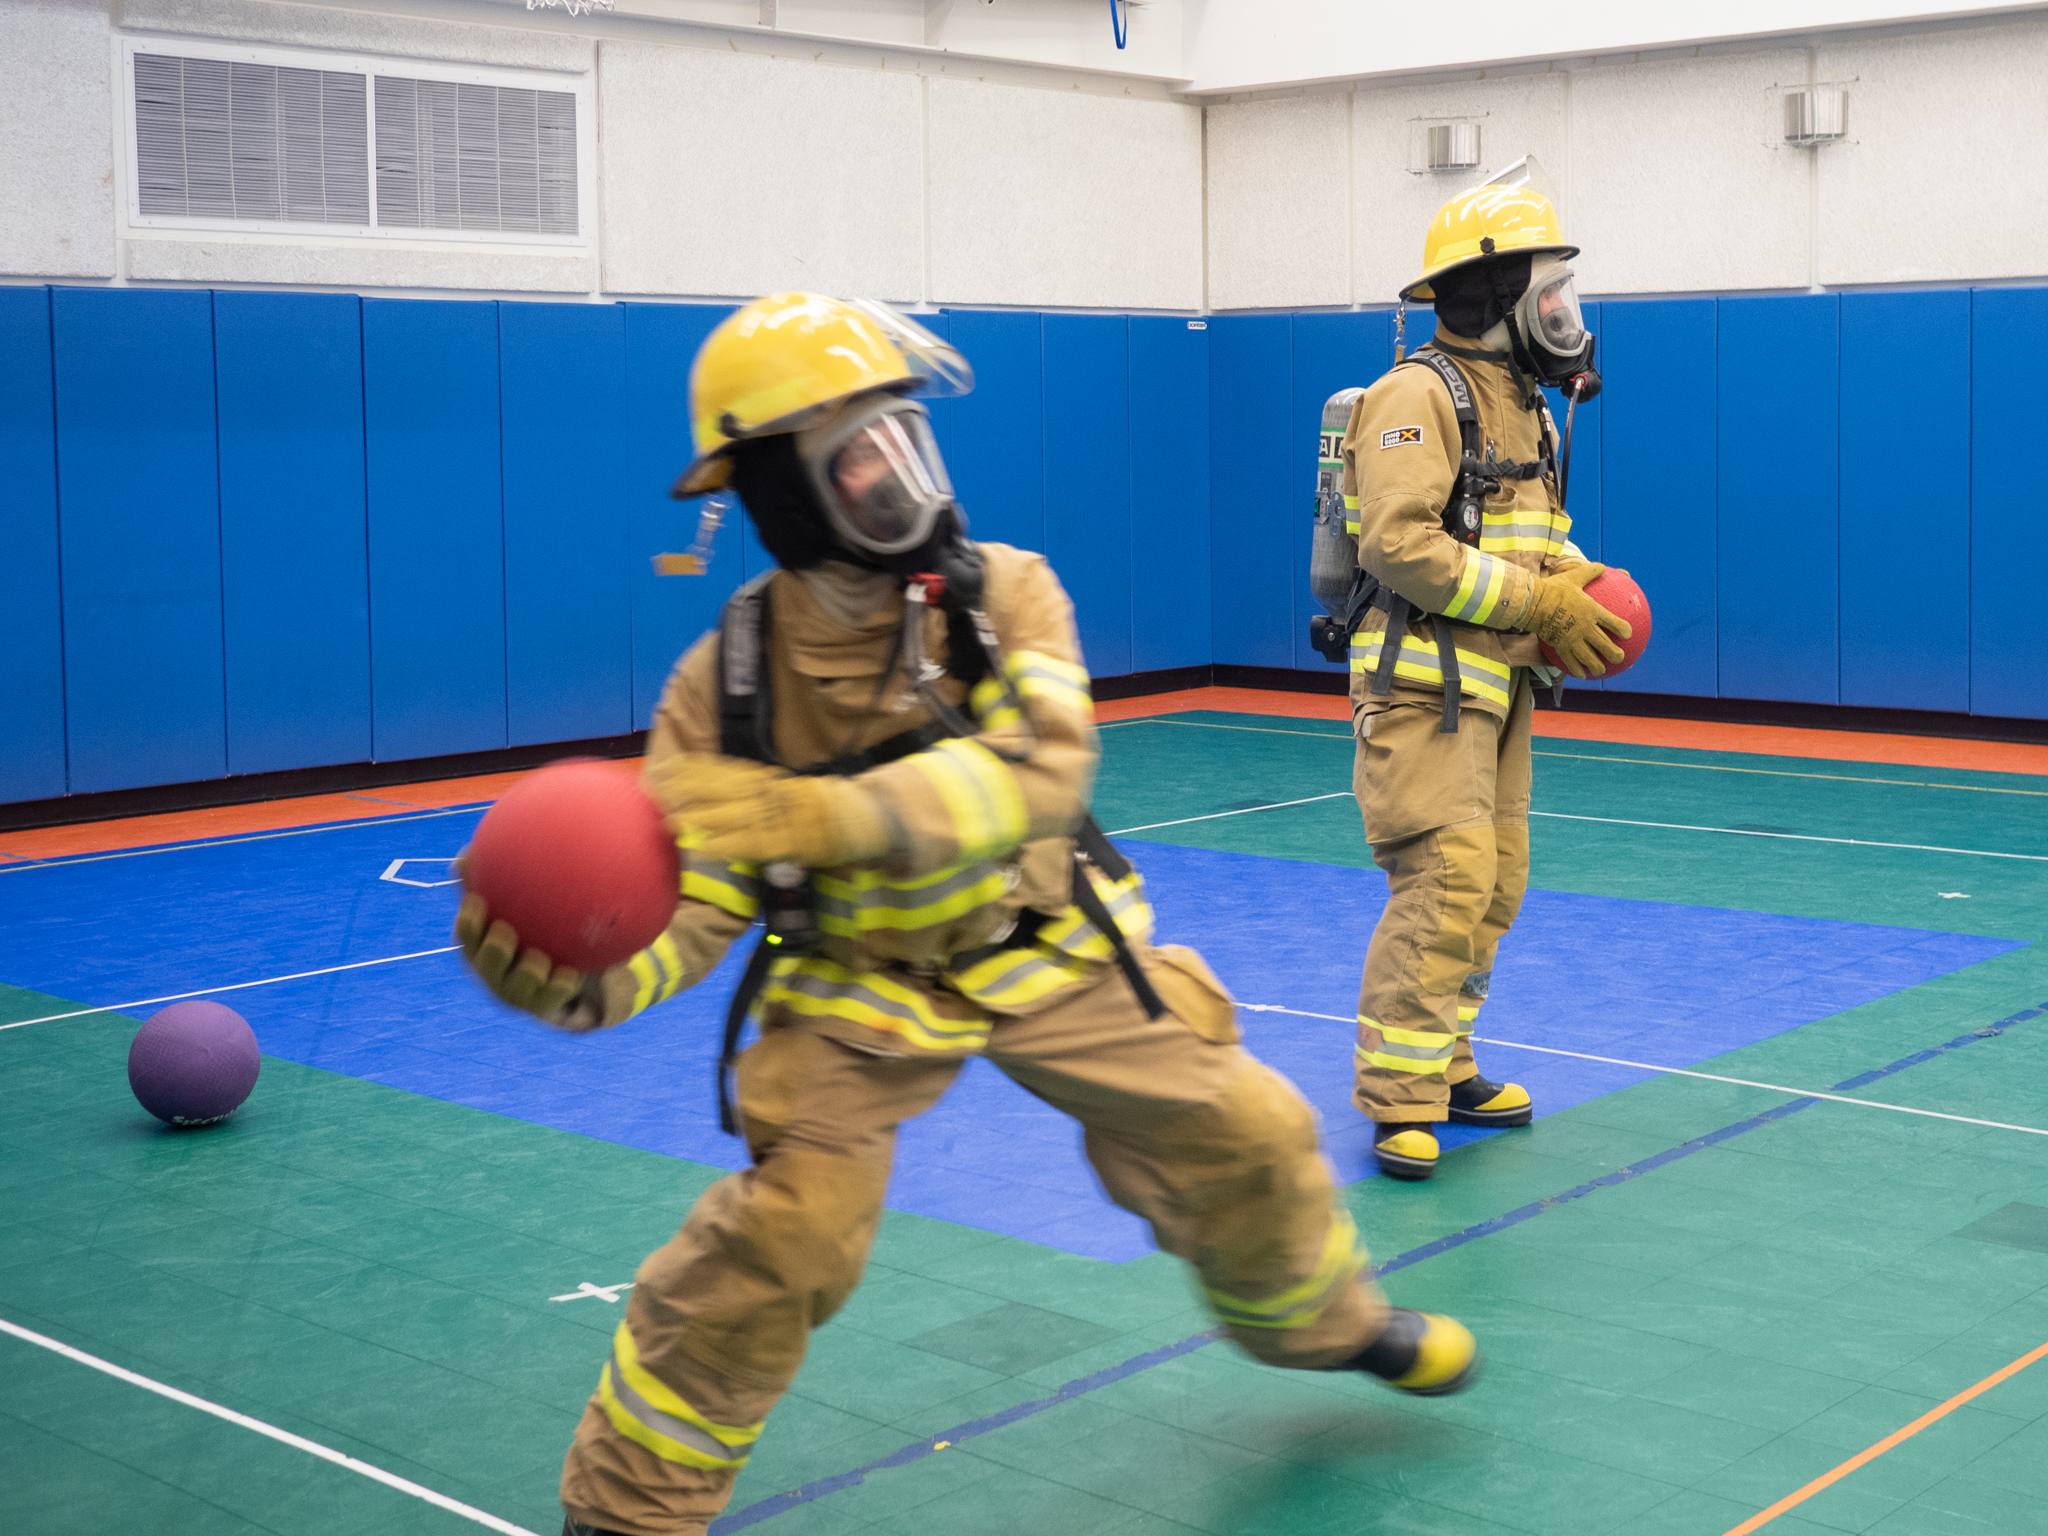 Two people in fire gear playing dodgeball in gym.]